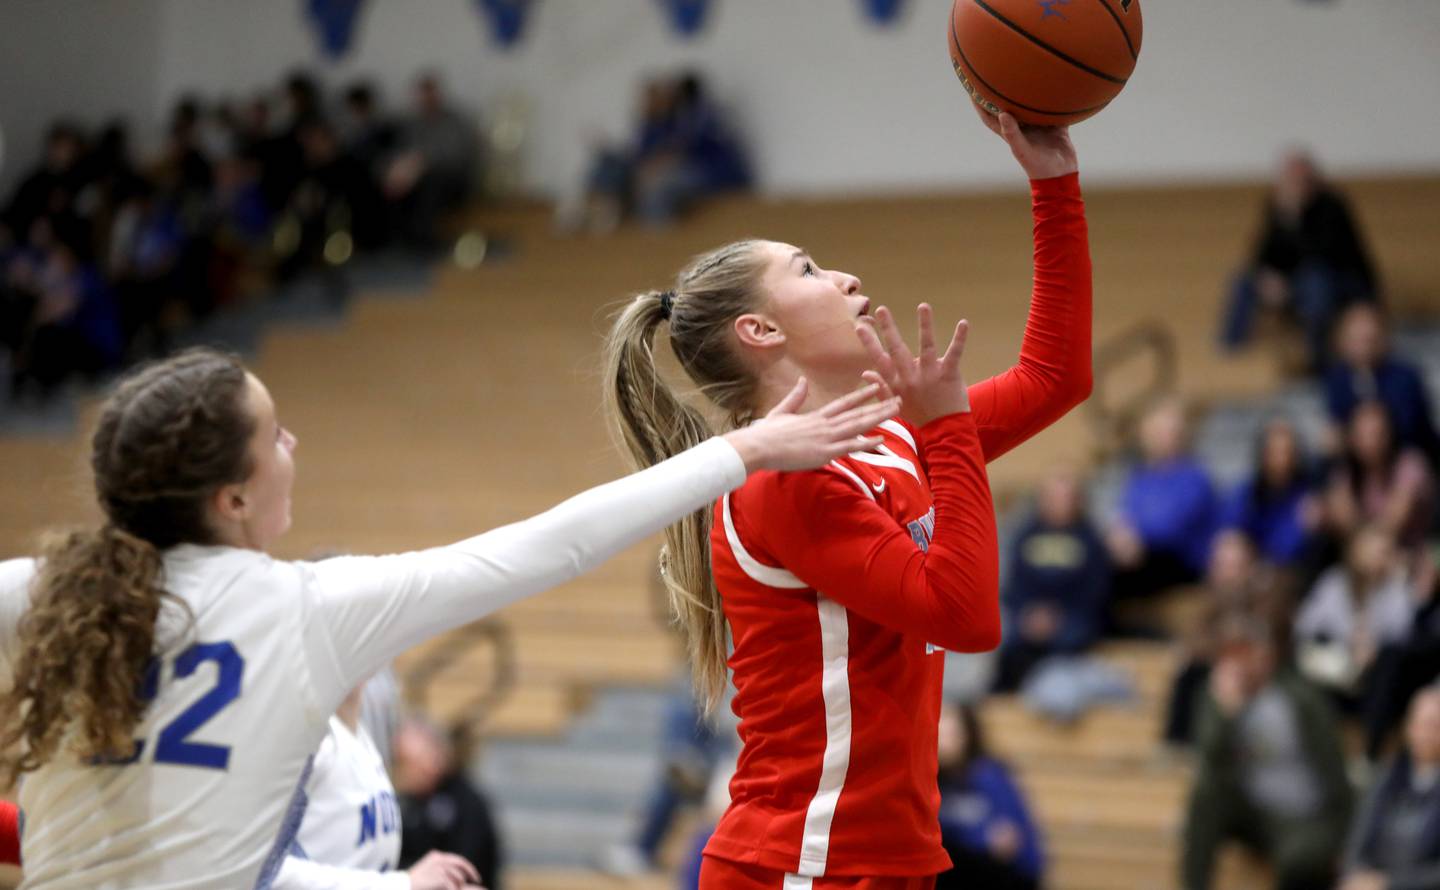 Batavia’s Kylee Gehrt puts up a shot during a game at St. Charles North on Tuesday, Feb. 7, 2023.